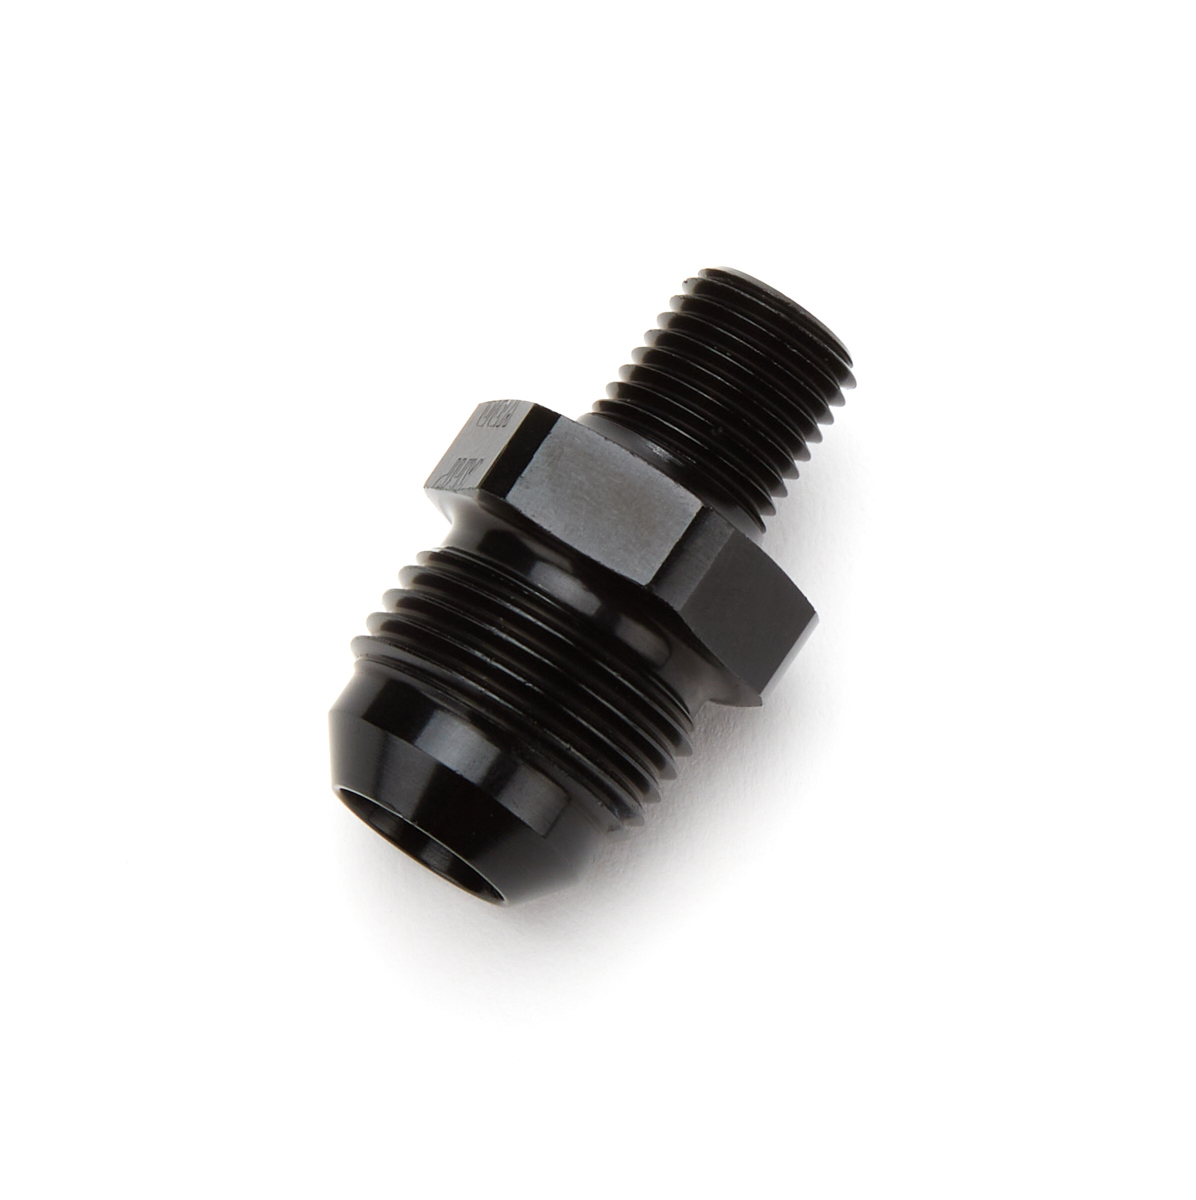 XRP 981699 Fitting, Adapter, Straight, 10 AN Male to 1/4 in NPT Male, Aluminum, Black Anodized, Each